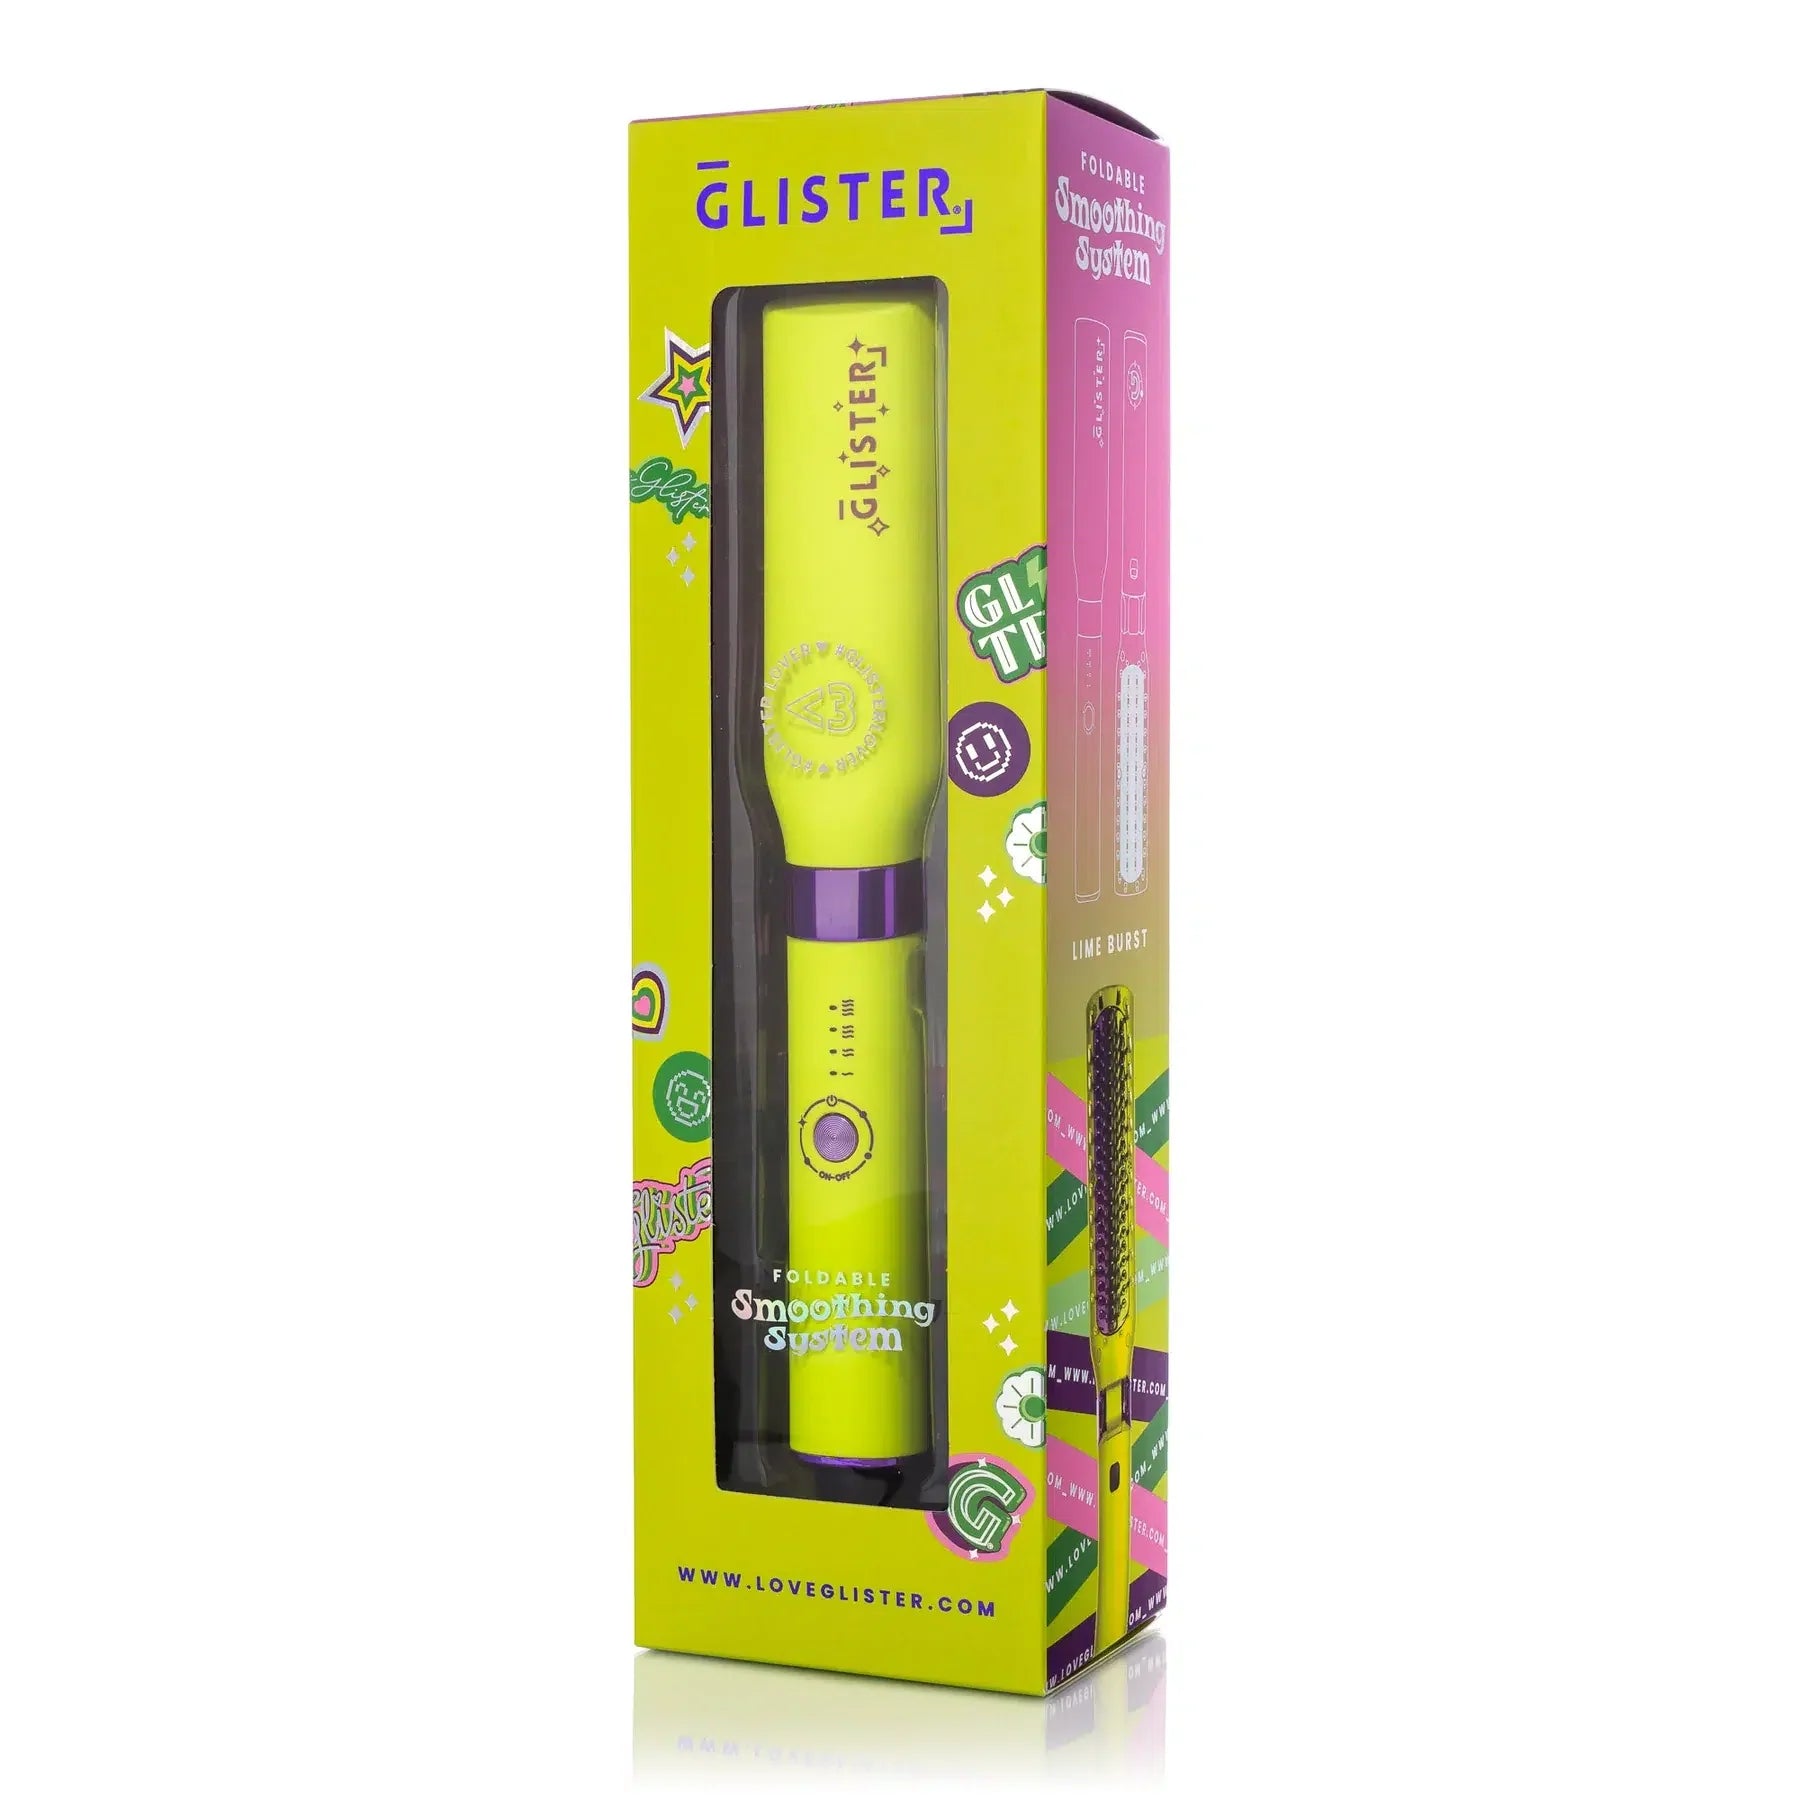 Glister hair care product Portable hair straightener